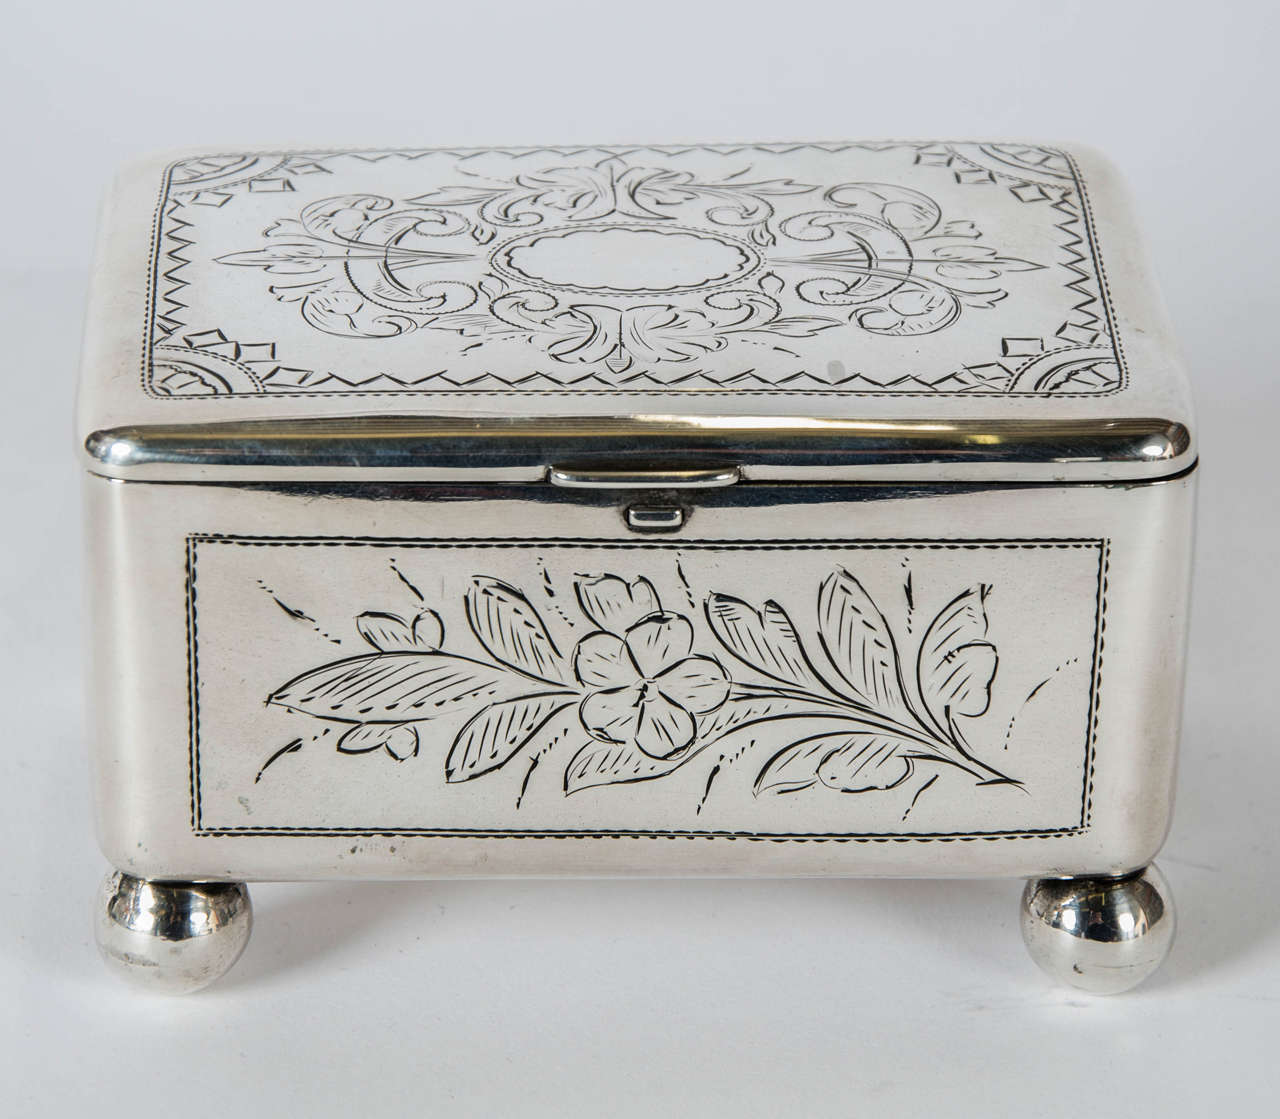 Judaica silver, a rare imperial Russian silver and silver gilt spice or sugar box, made during the Russian occupation of Poland. Hand engraved with floral and scroll motifs to all sides and fitted with a push button to open the lid with the interior